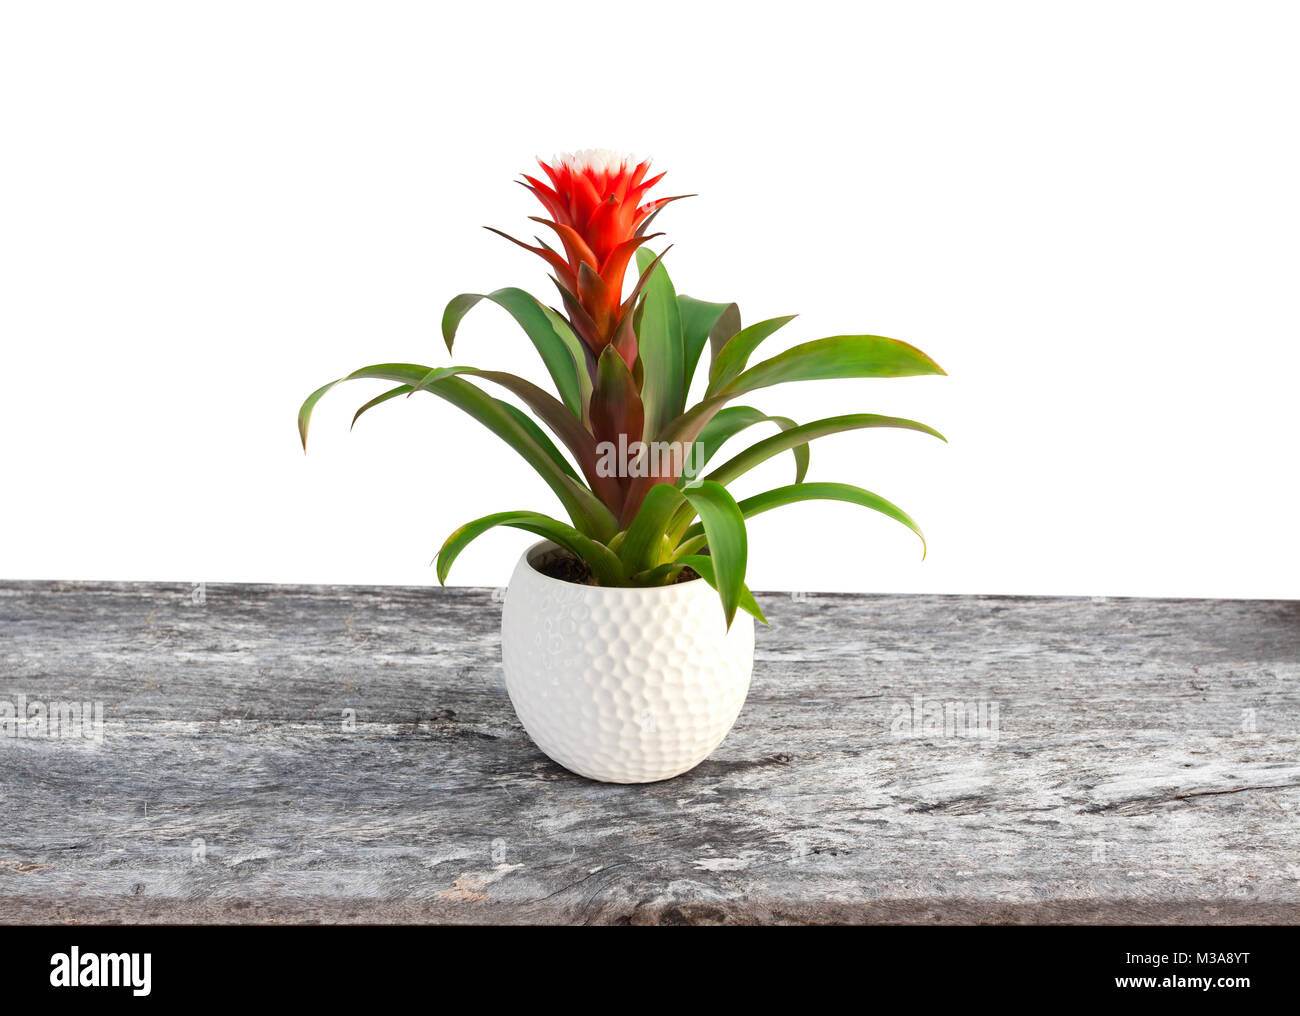 Guzmania  flower blossom isolated image of the flower in the white pot on the table Stock Photo